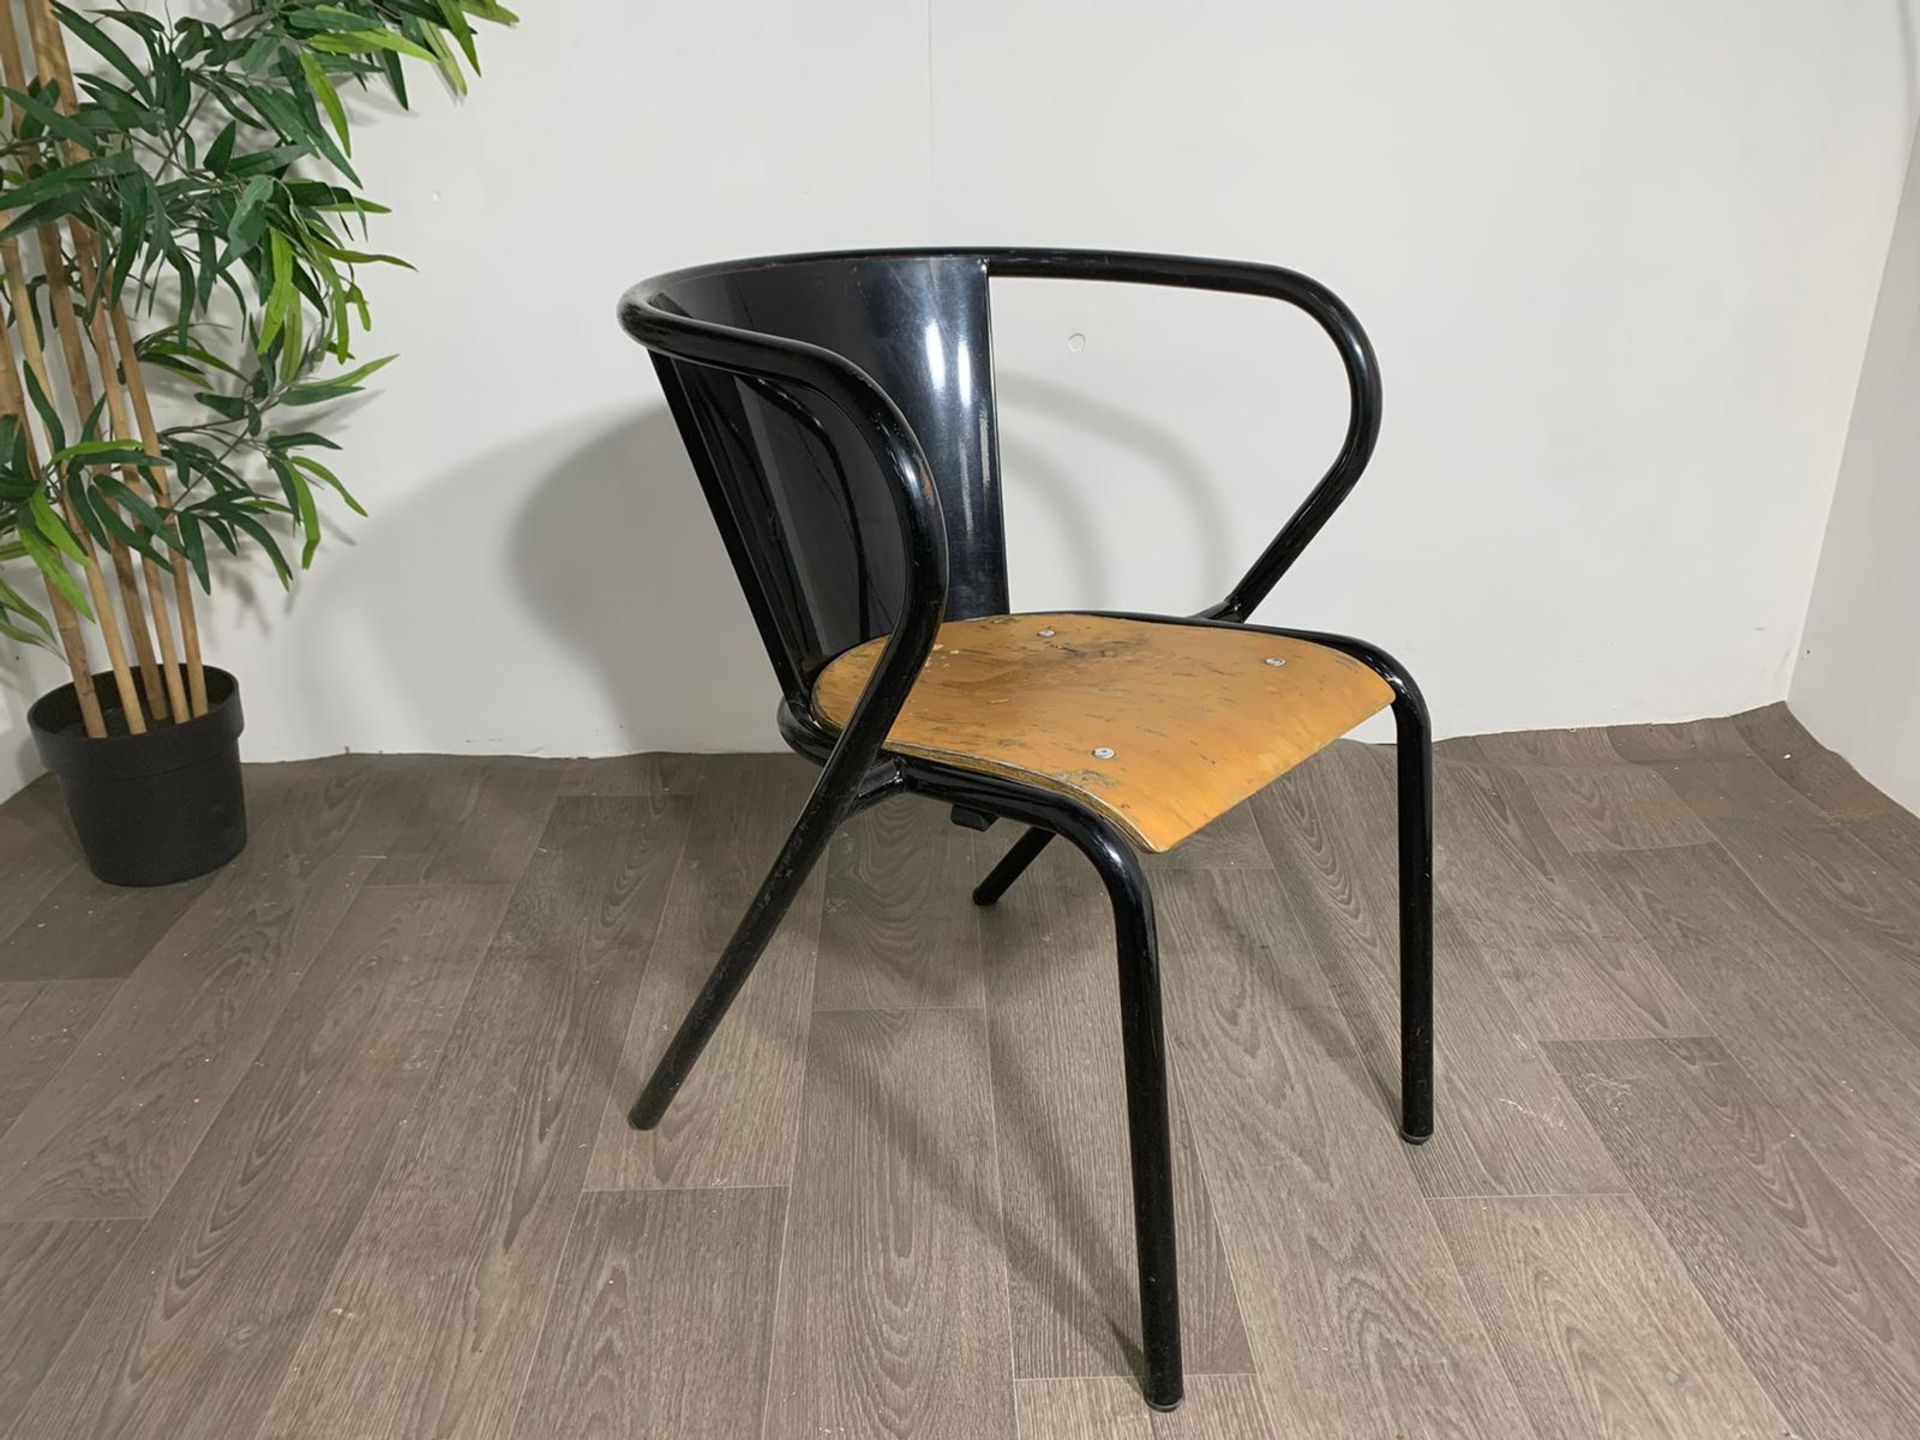 Adico 5008 Black Chair With Wooden Seat - Image 2 of 10